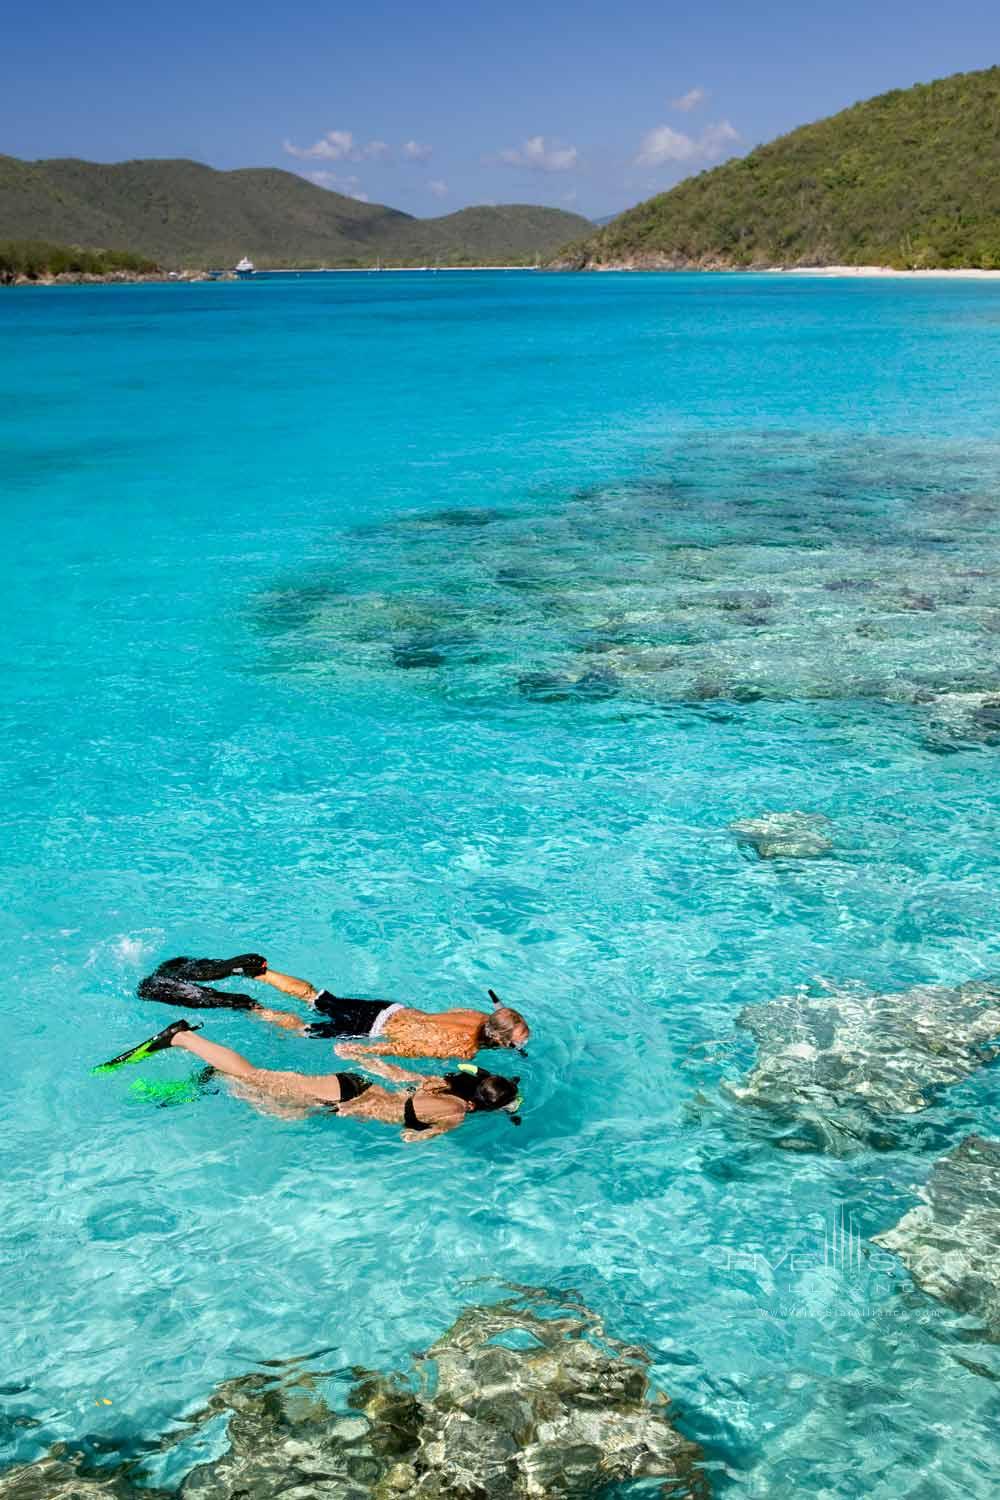 Enjoy diving activity in the clear blue waters of Nanuku Resorts, Fiji Islands